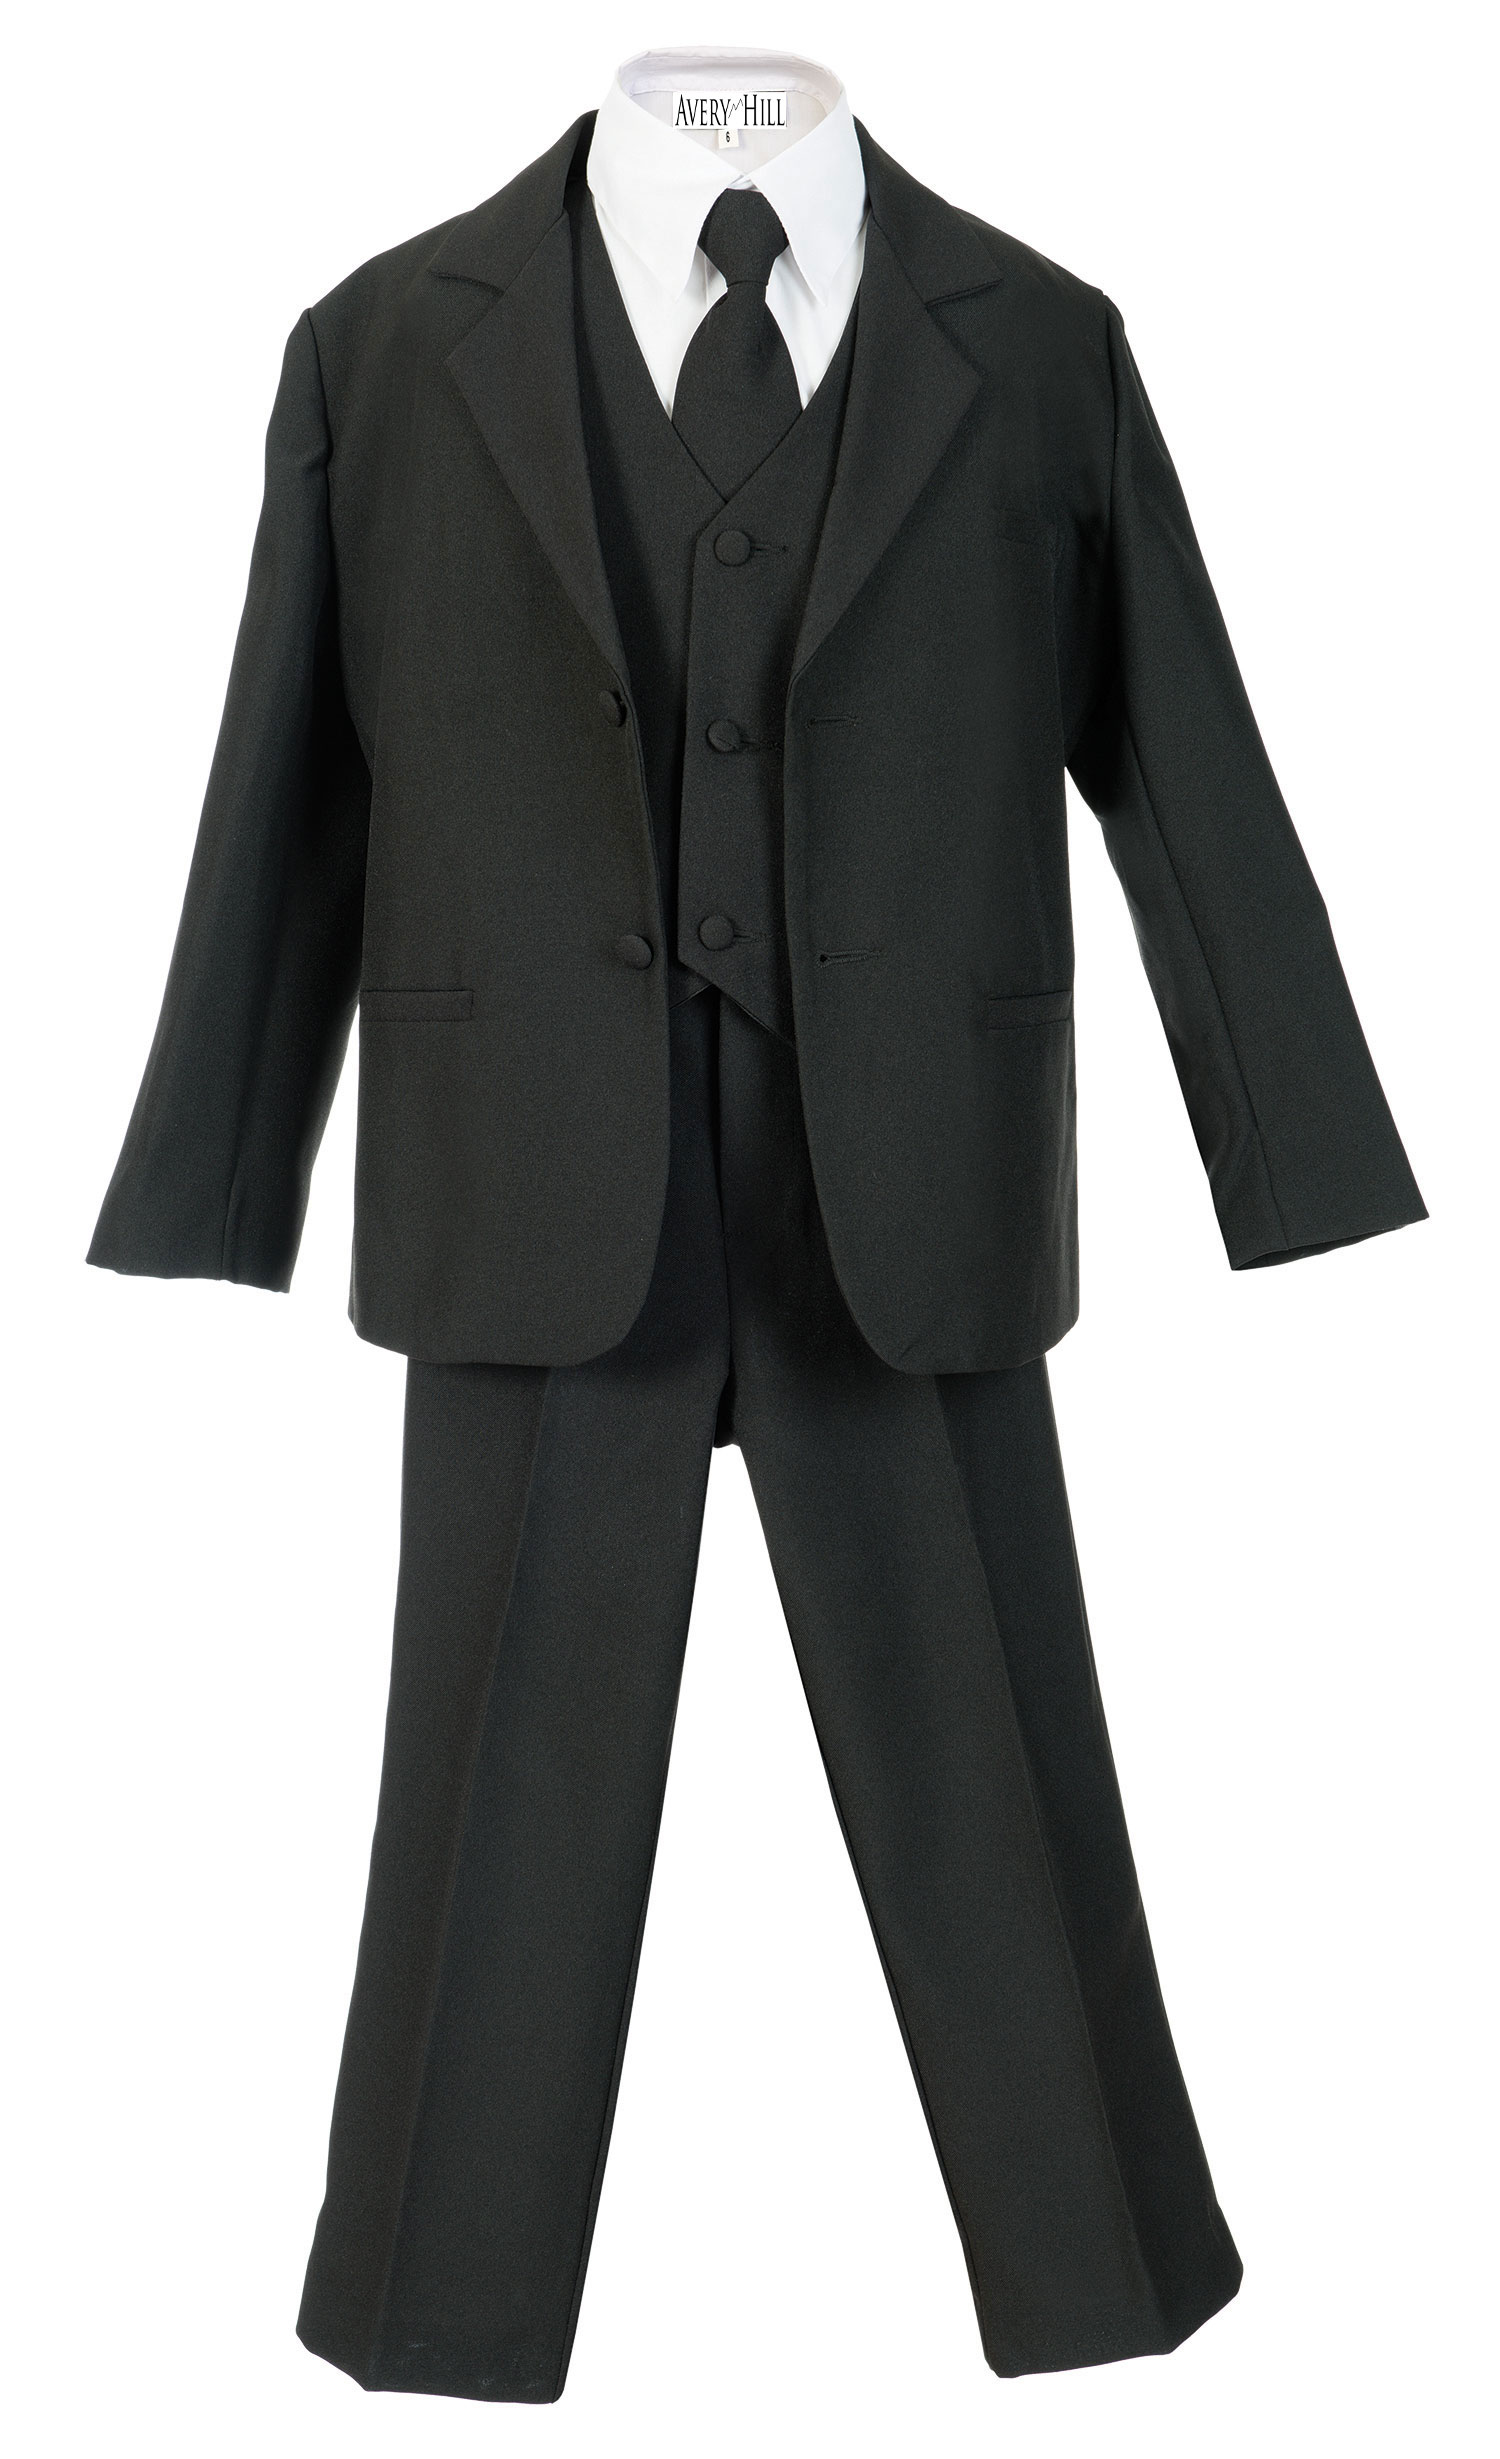 Avery Hill Boys Formal 5 Piece Suit with Shirt and Vest Black - L